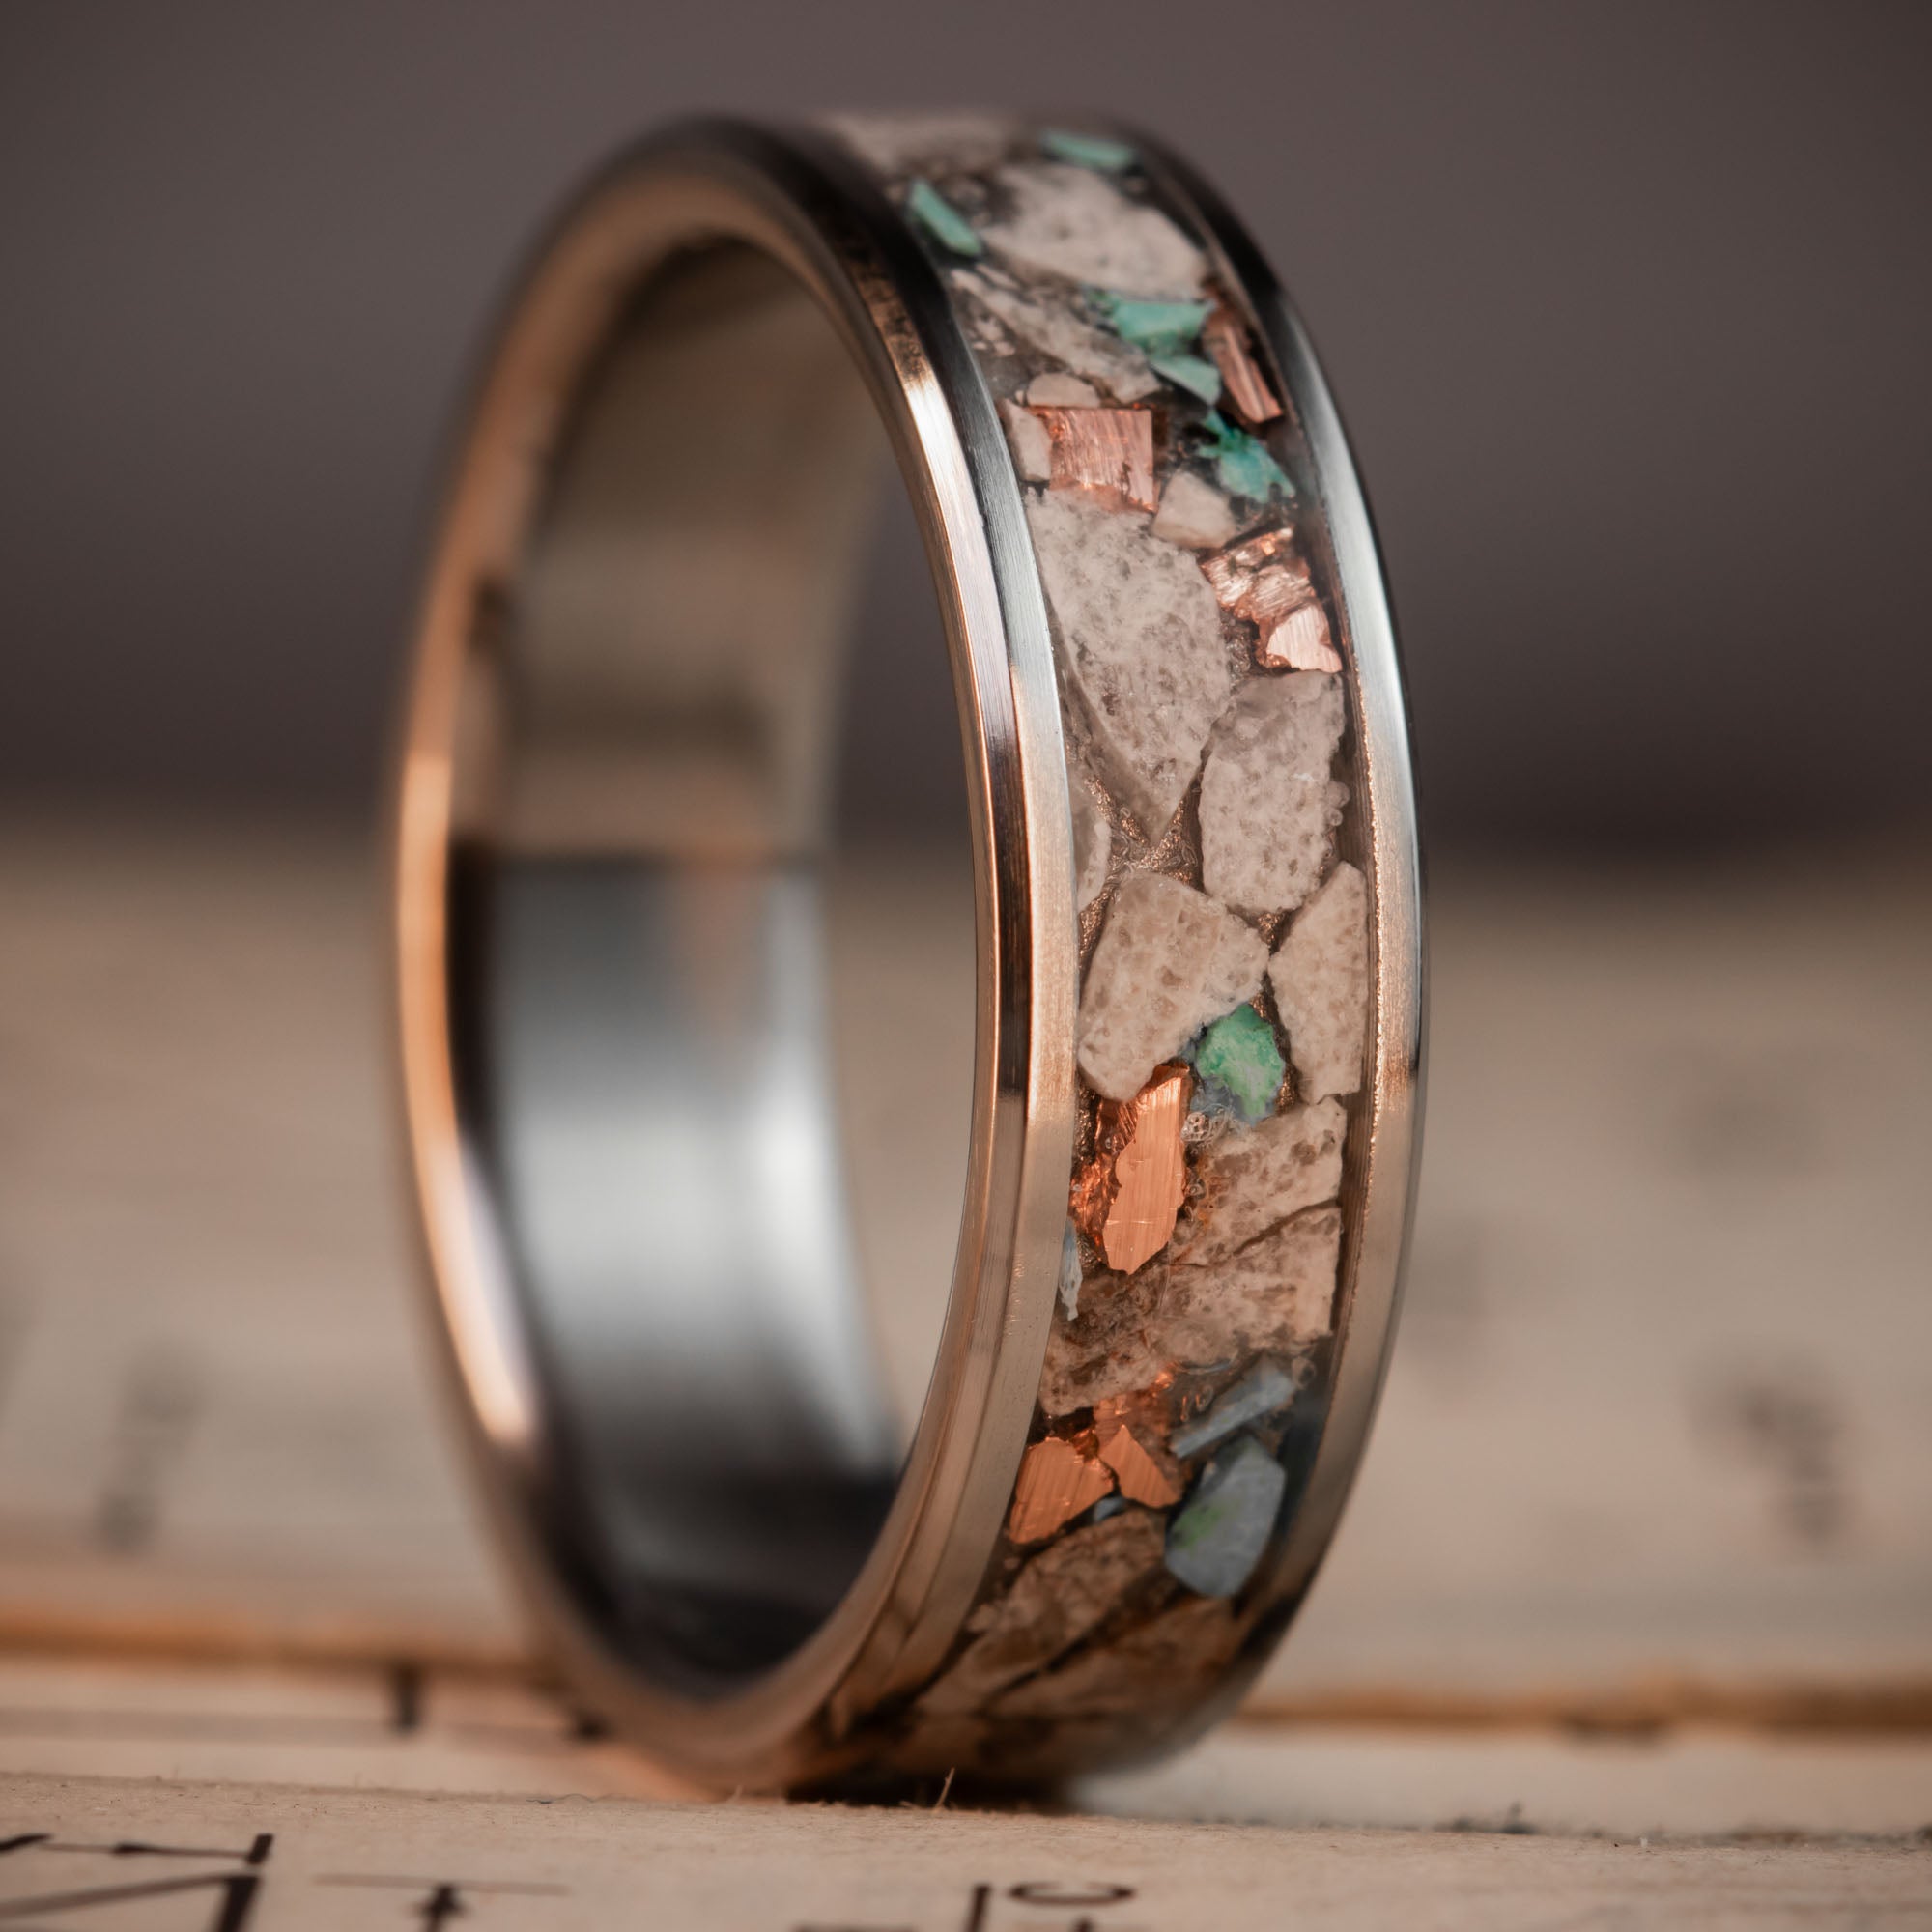 Amazon.com: Boho Men's Wedding Band, Rustic Copper Ring, Silver and Copper  Ring, Wide Man's Band, 10 mm Copper Engagement ring, Textured Ring, RS-1162  : Handmade Products